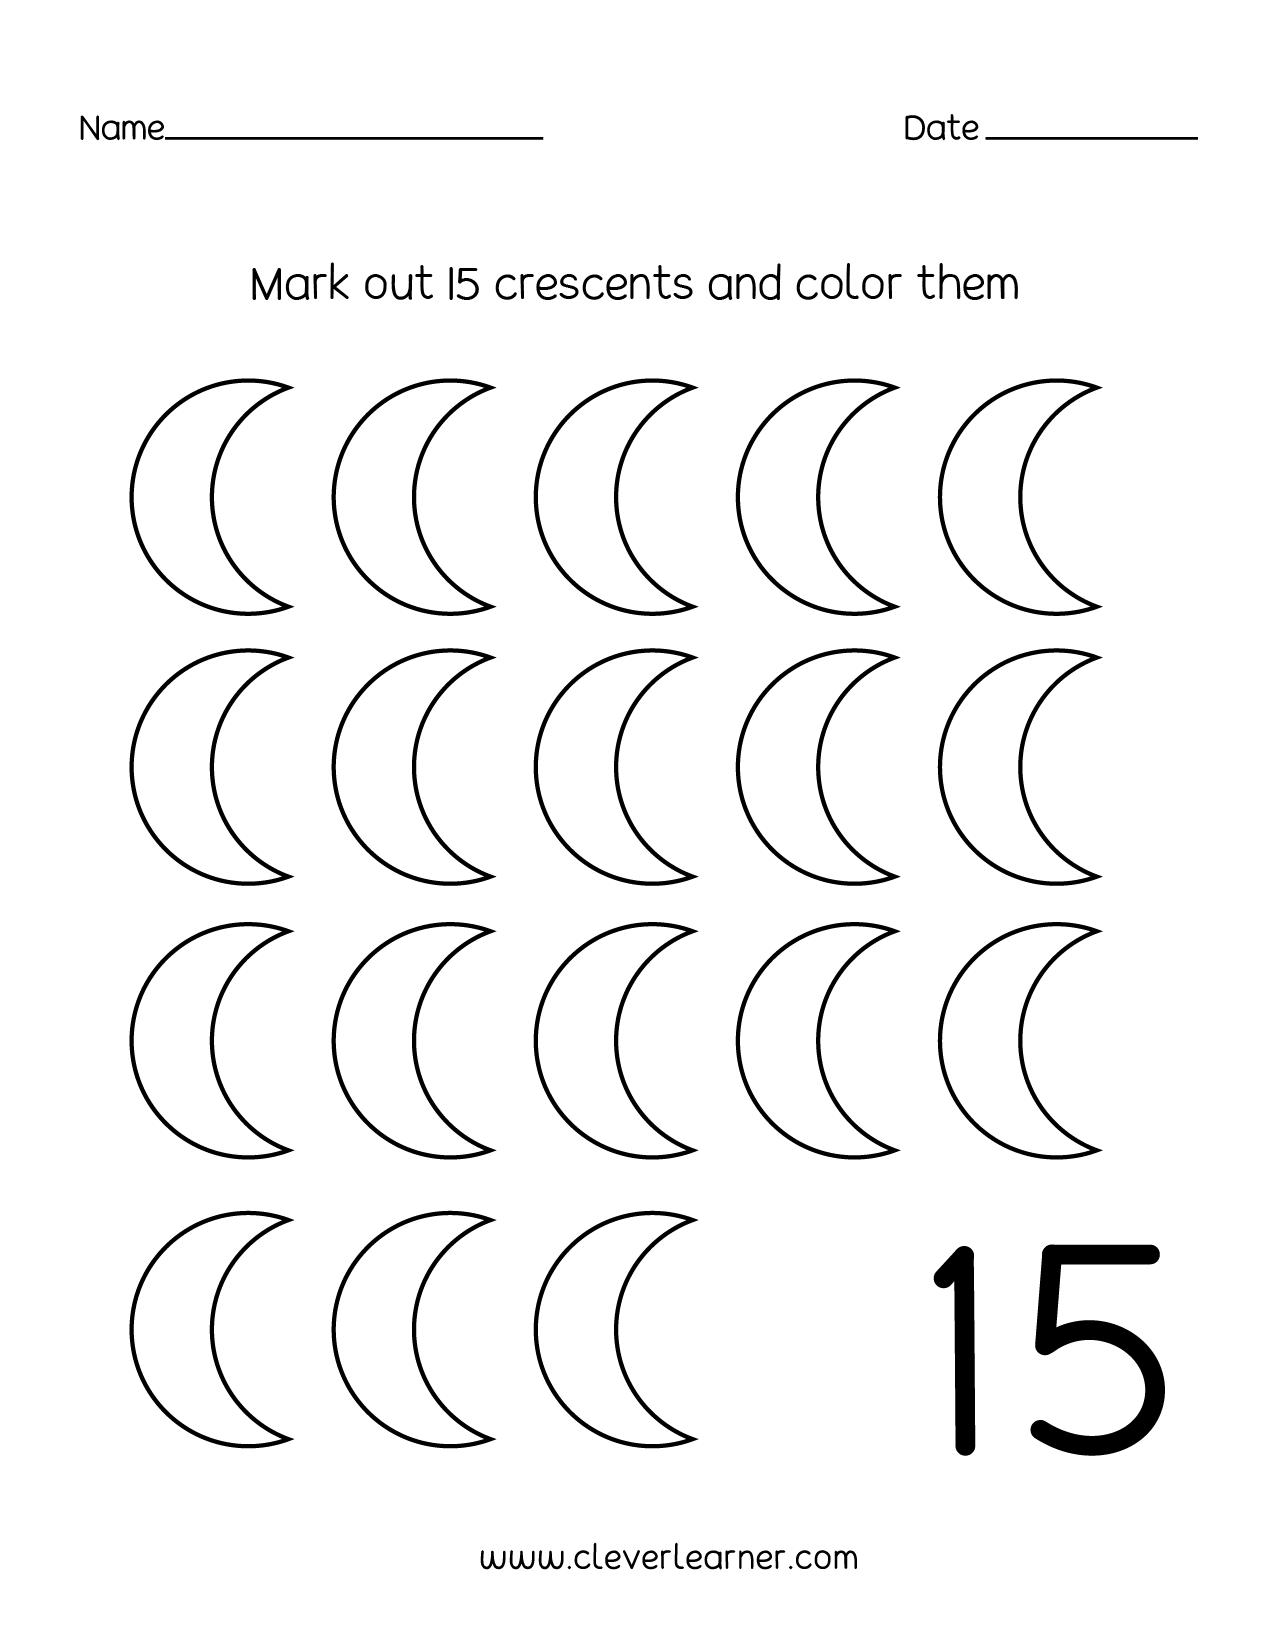 number-15-writing-counting-and-identification-printable-worksheets-for